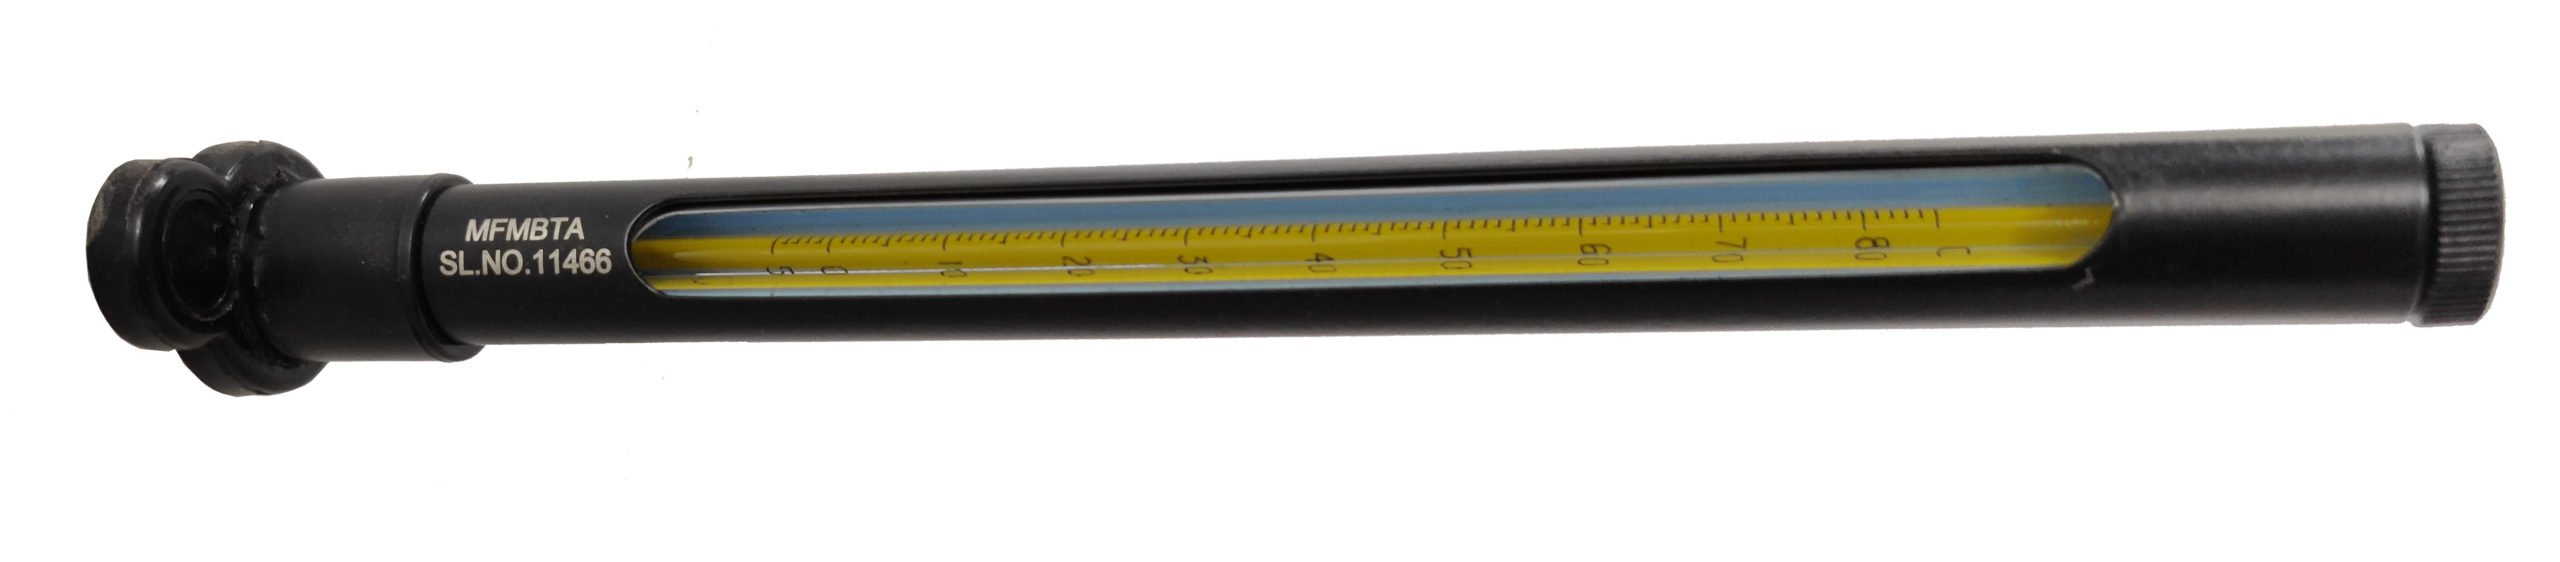 RAIL THERMOMETER MODEL MFMBT-A